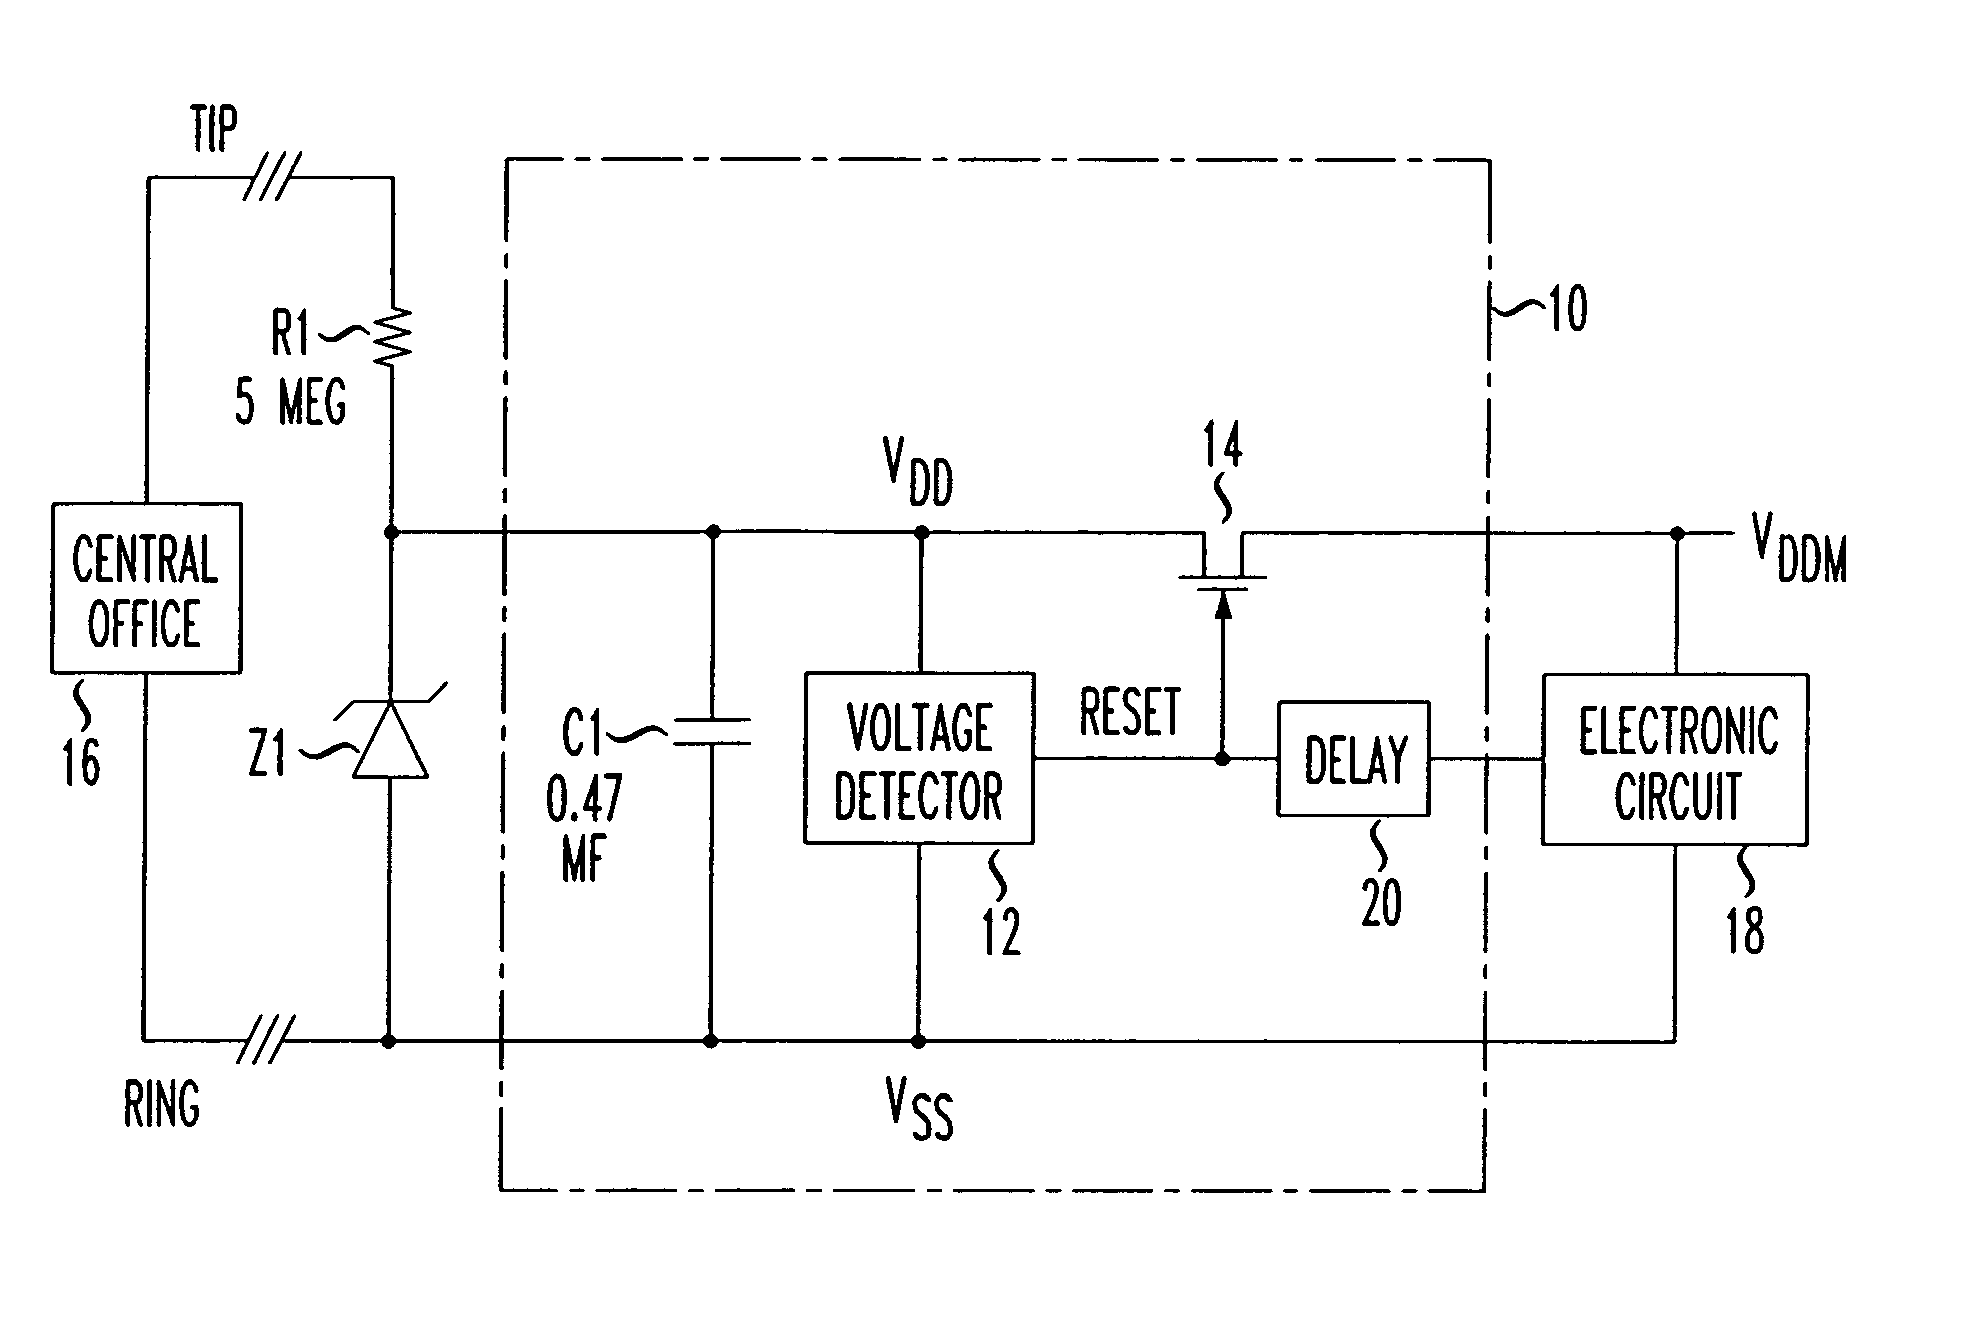 Power up reset circuit for line powered circuit